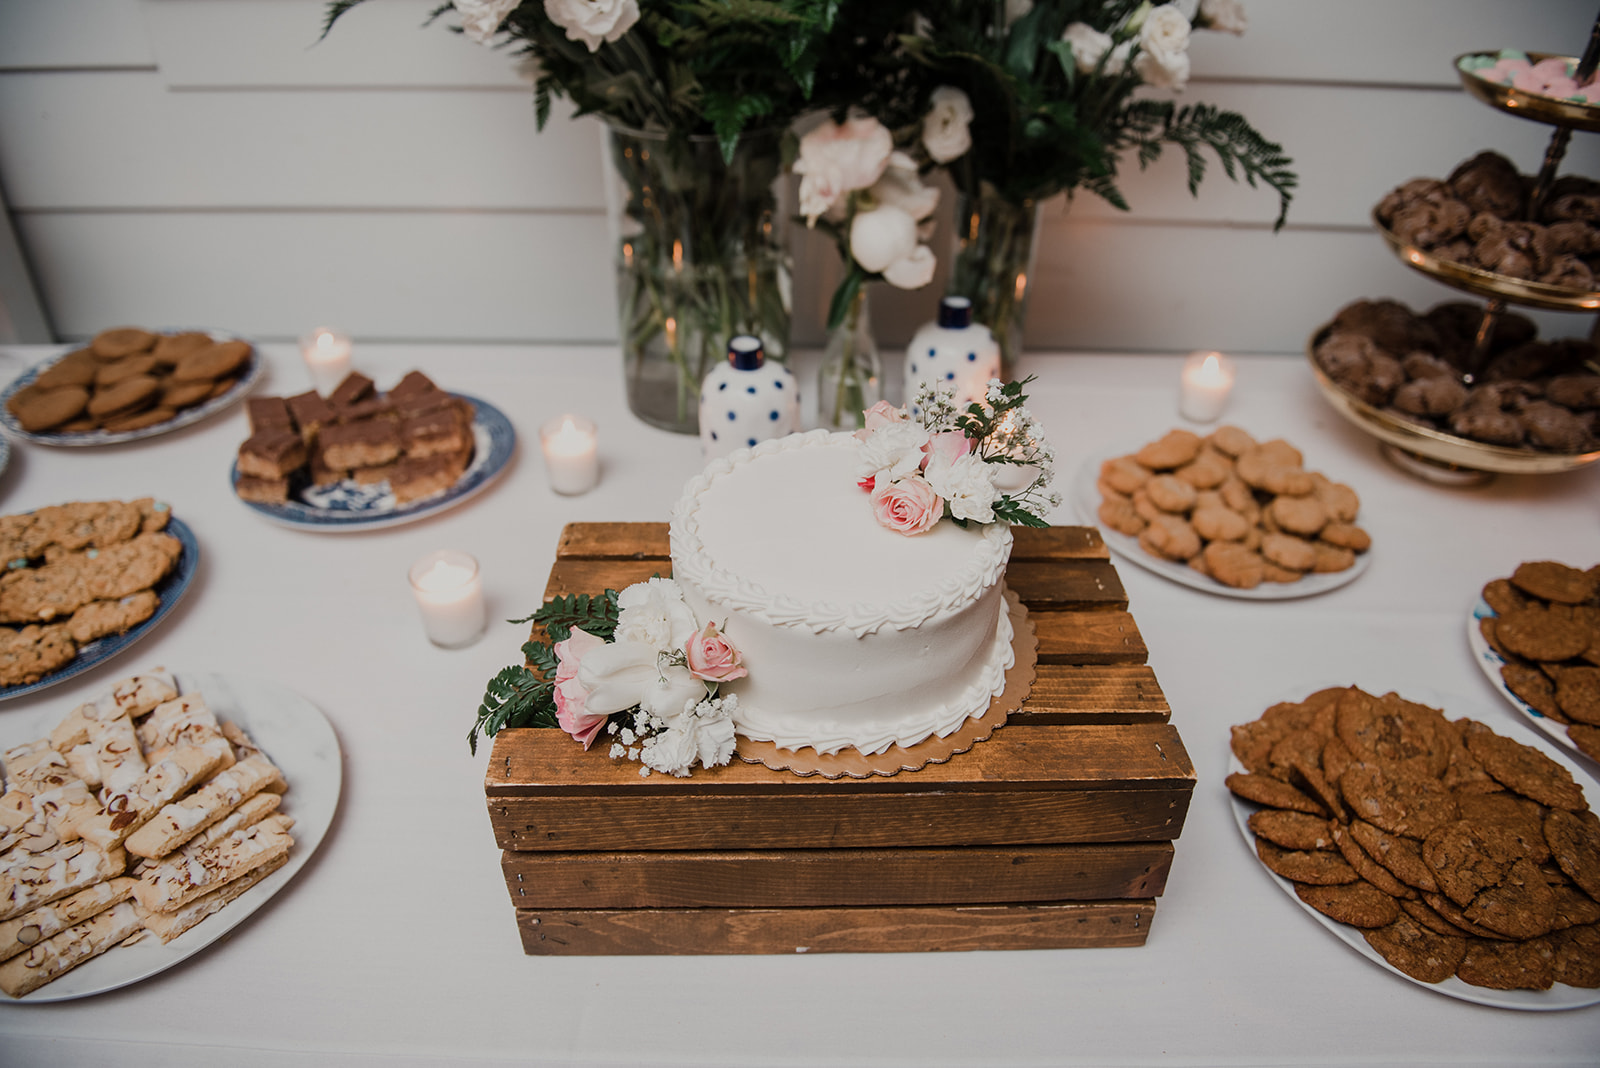 A white buttercream cake sits on a rustic wooden crate surrounded by other desserts at a wedding reception at Blue Hill Farm in Waterford, VA.